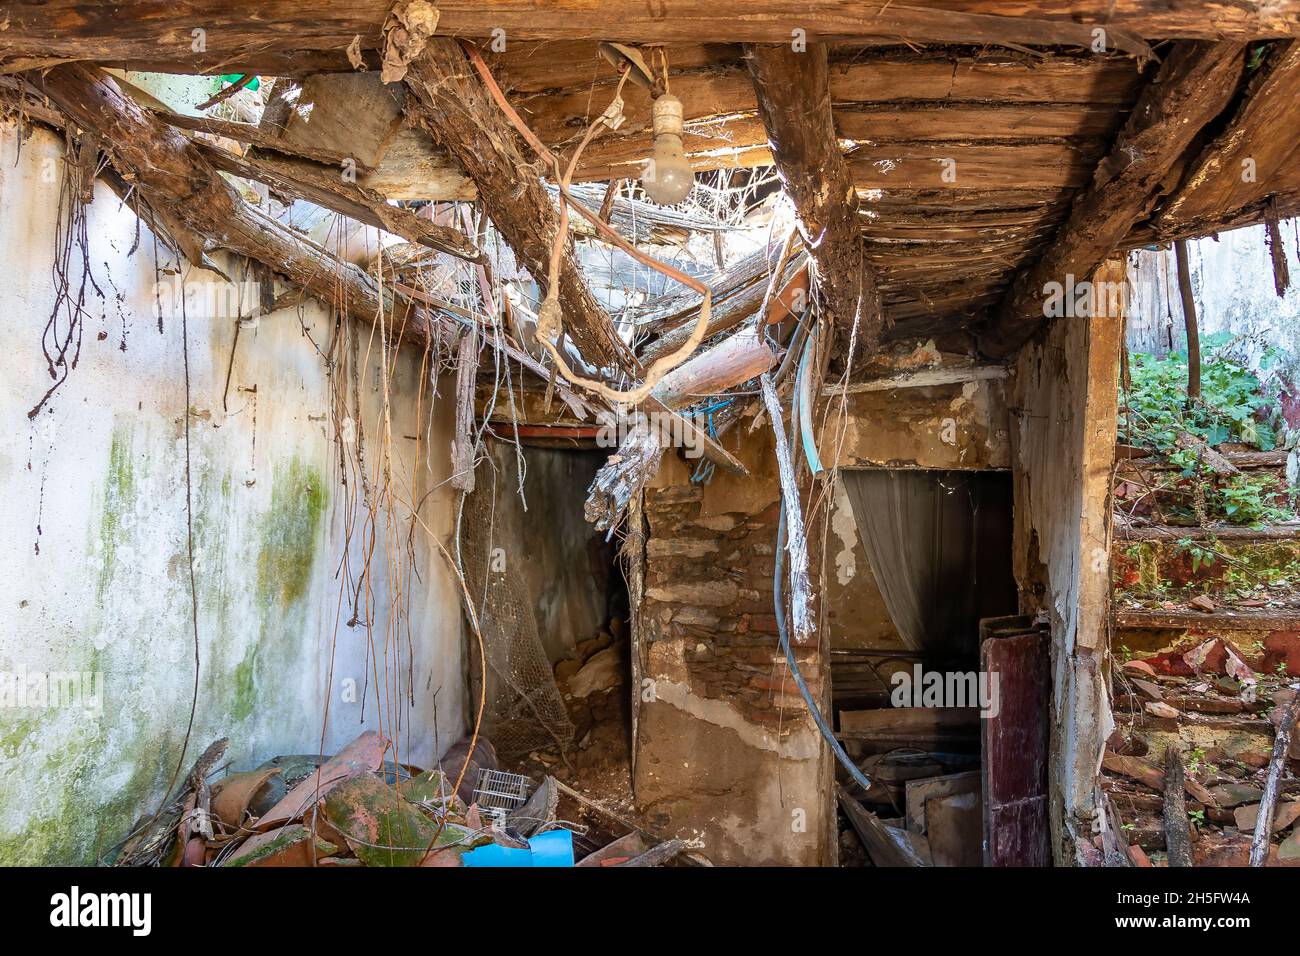 View of interior of a ruined and abandoned residential house Stock Photo